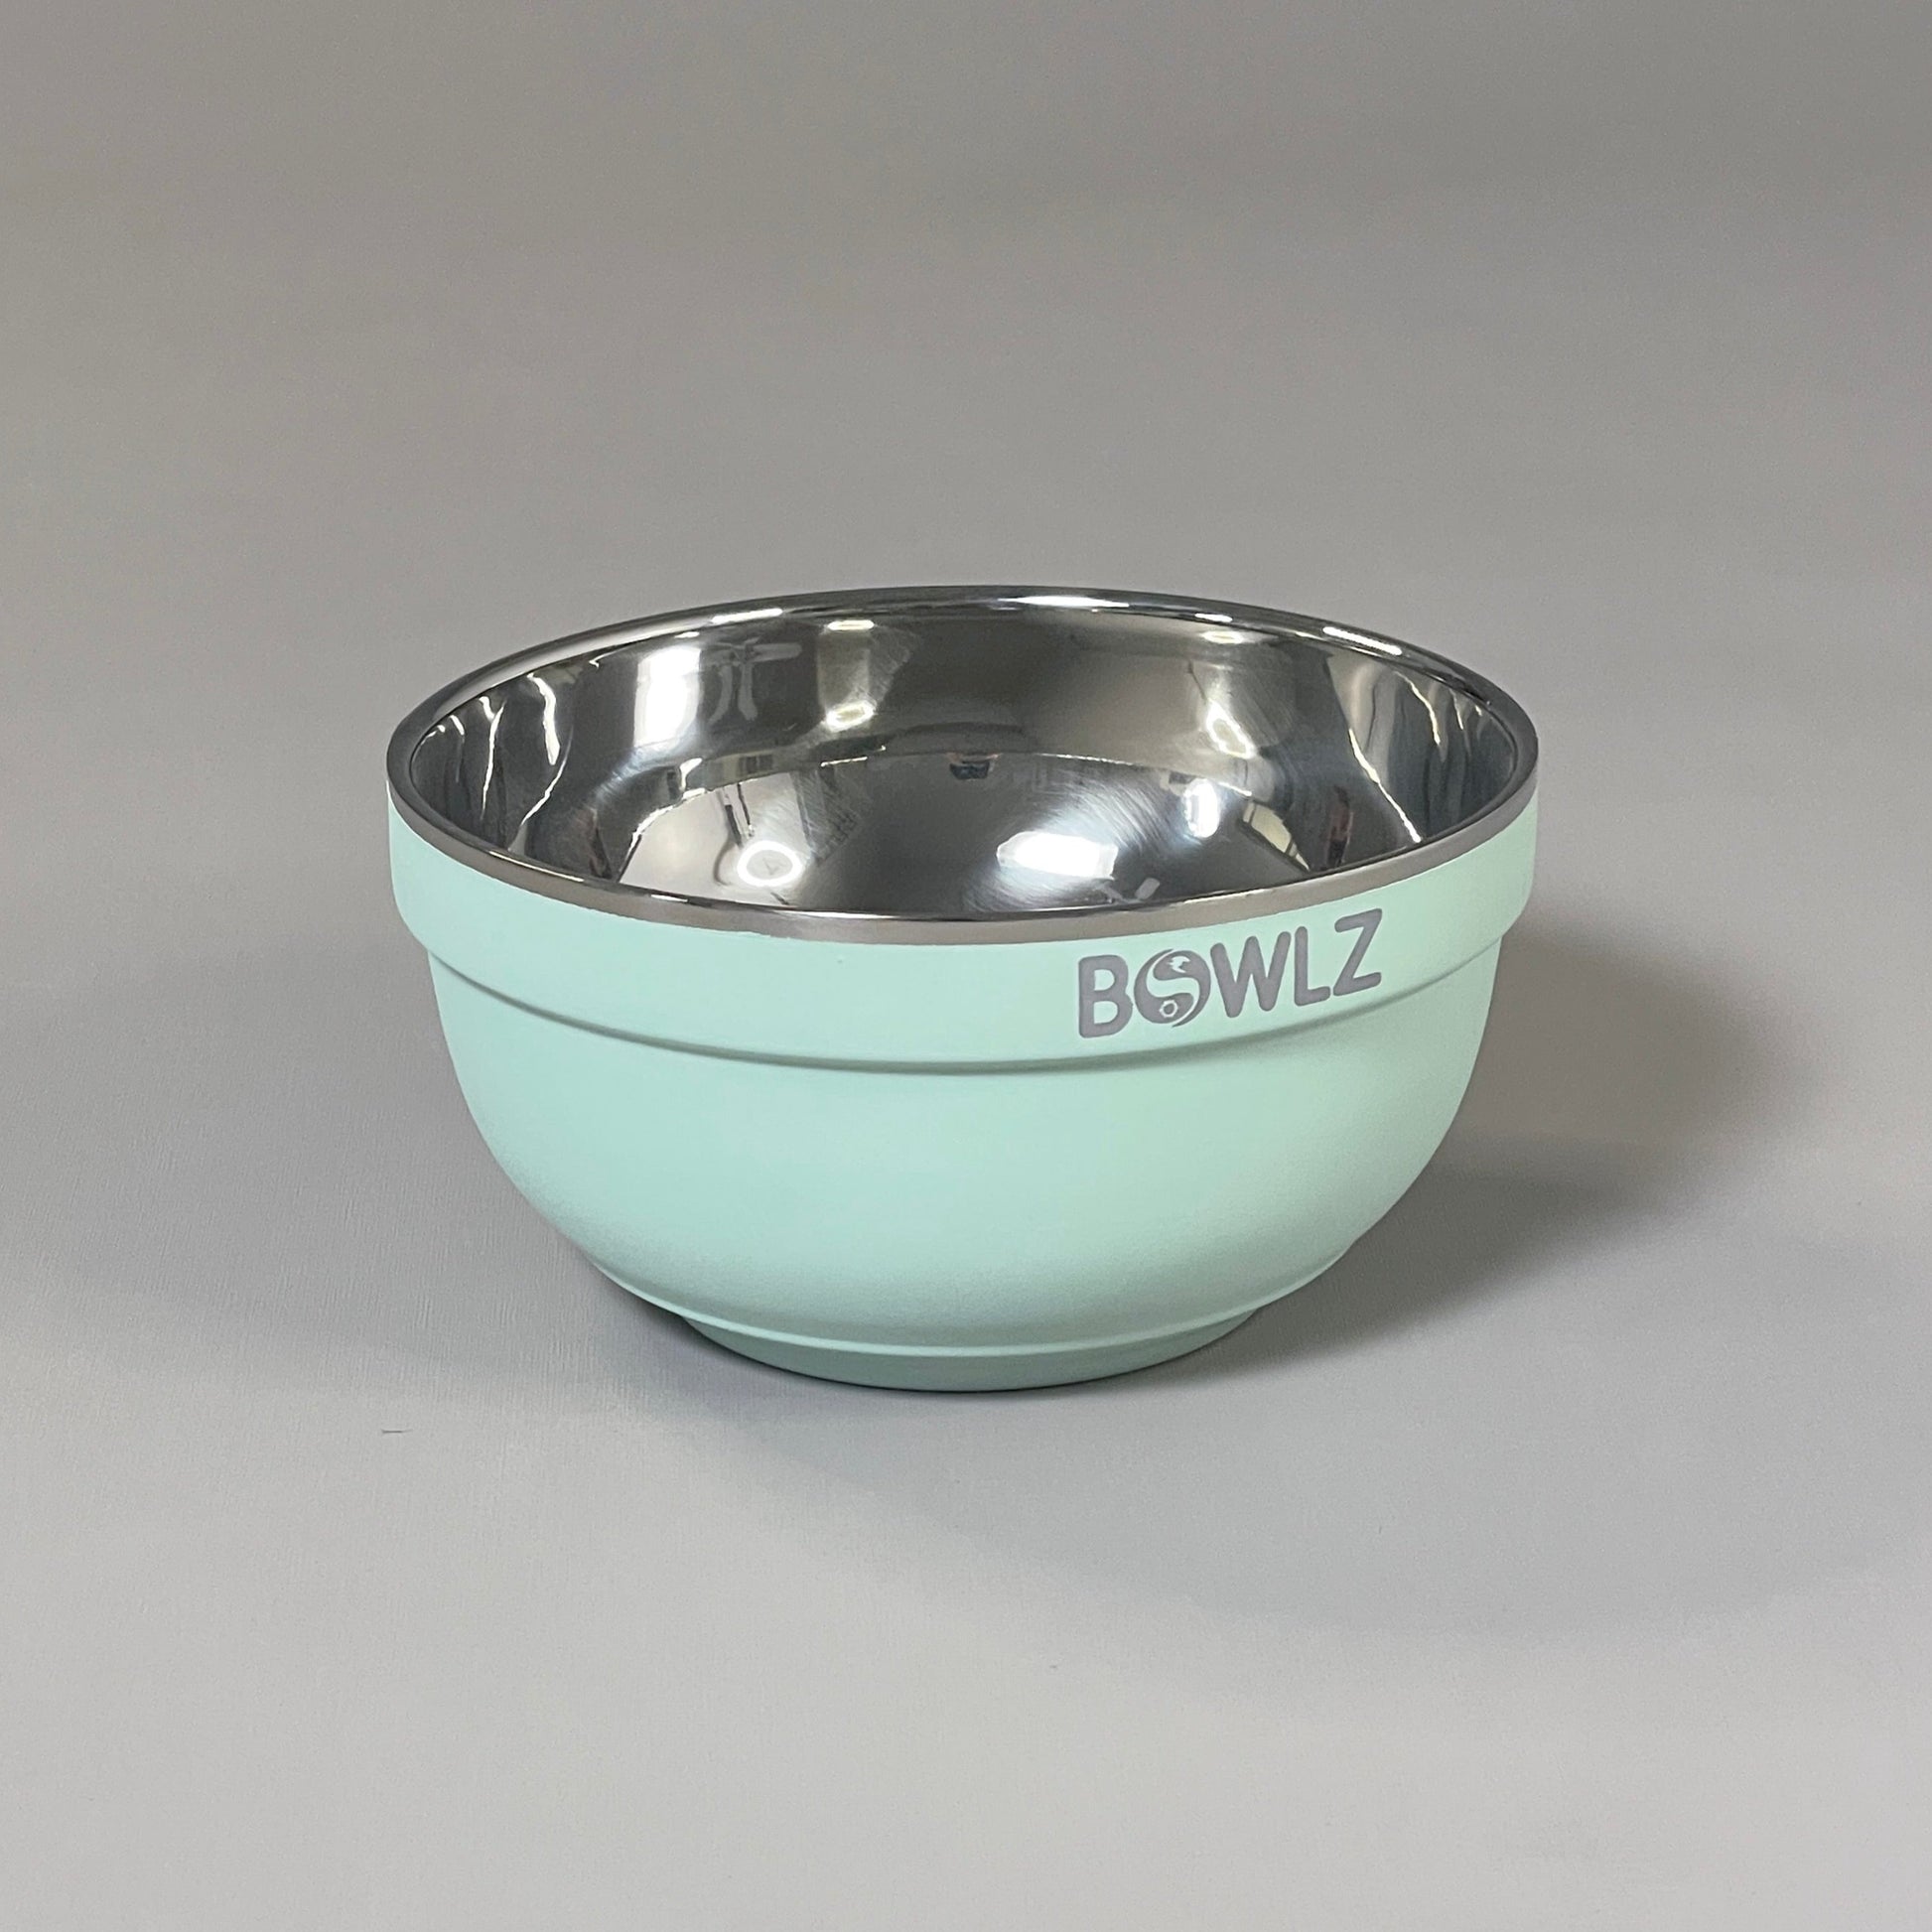 BOWLZ Set of 6 Stainless Steel Insulated Bowl 16 oz Pink (New) ~Keeps Ice  Cream